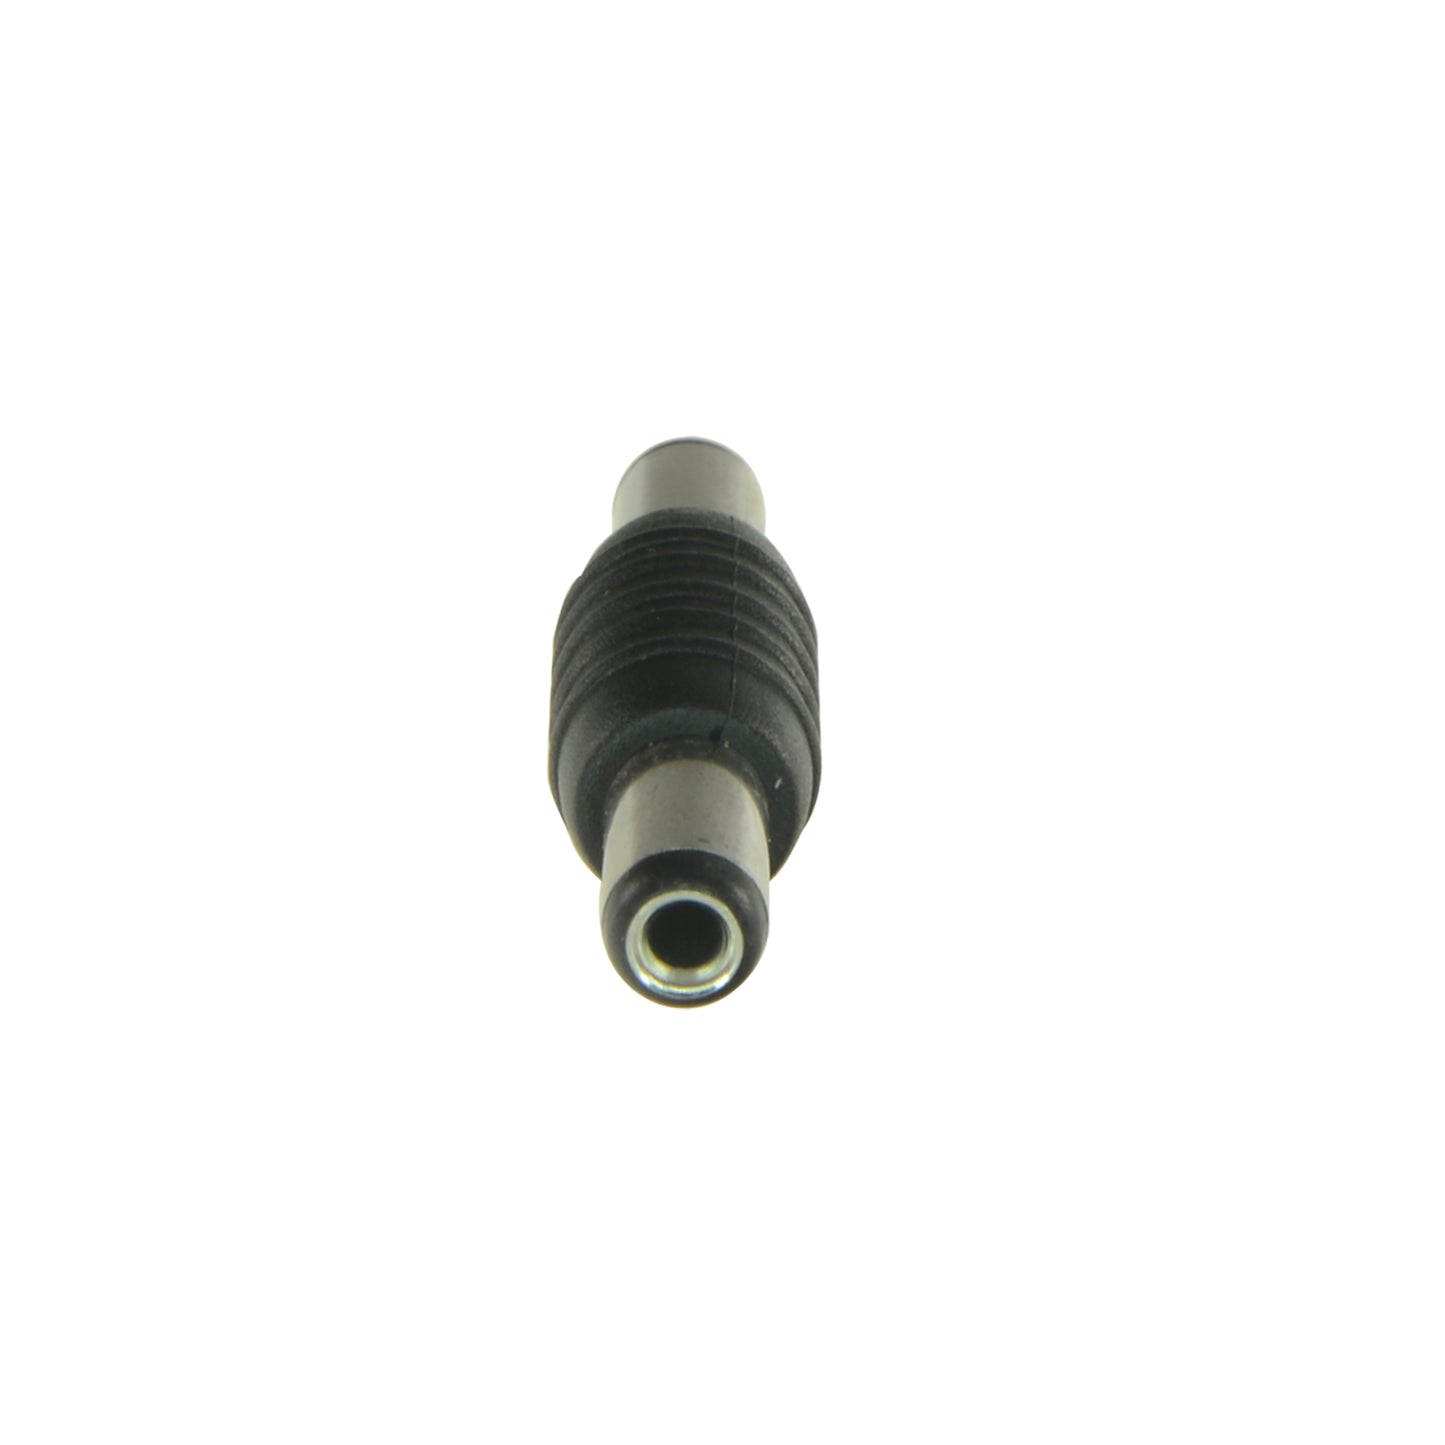 Connector - DC Male to DC Male - 39mm (Fo) - 5mm (An) - 3g